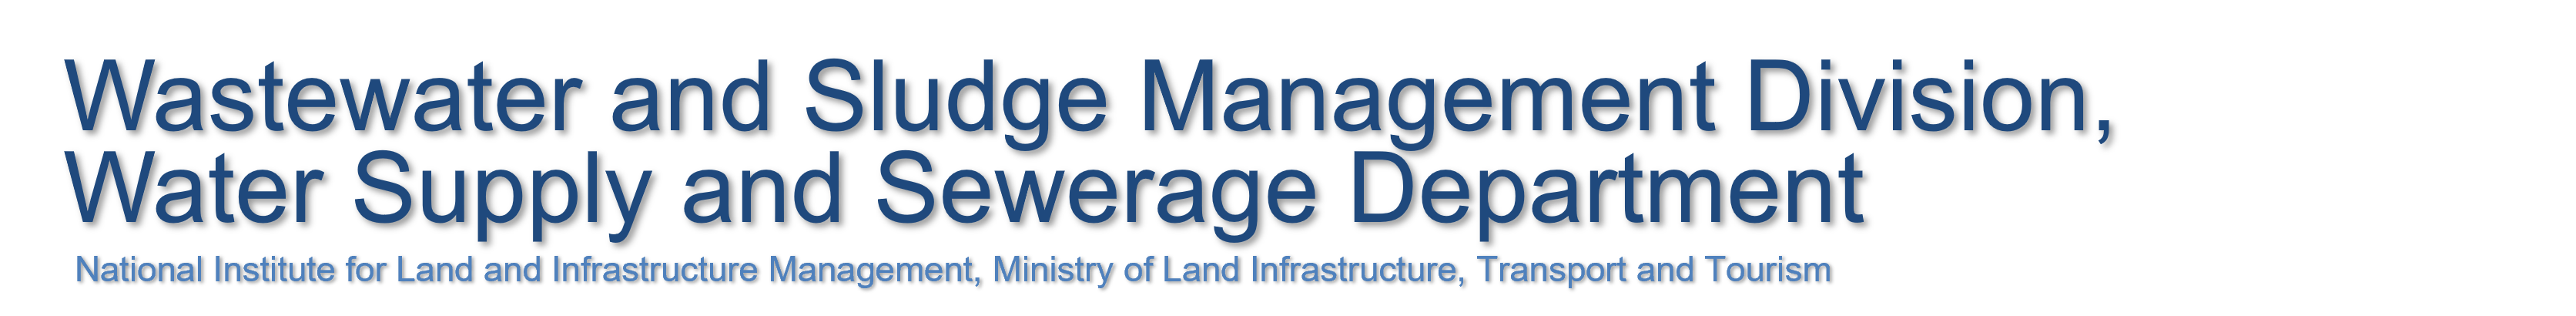 Wastewater and Sludge Management Division, Water Quality Control Department, National Institute for Land and Infrastructure Management, Ministry of Land, Infrastructure, Transport and Tourism